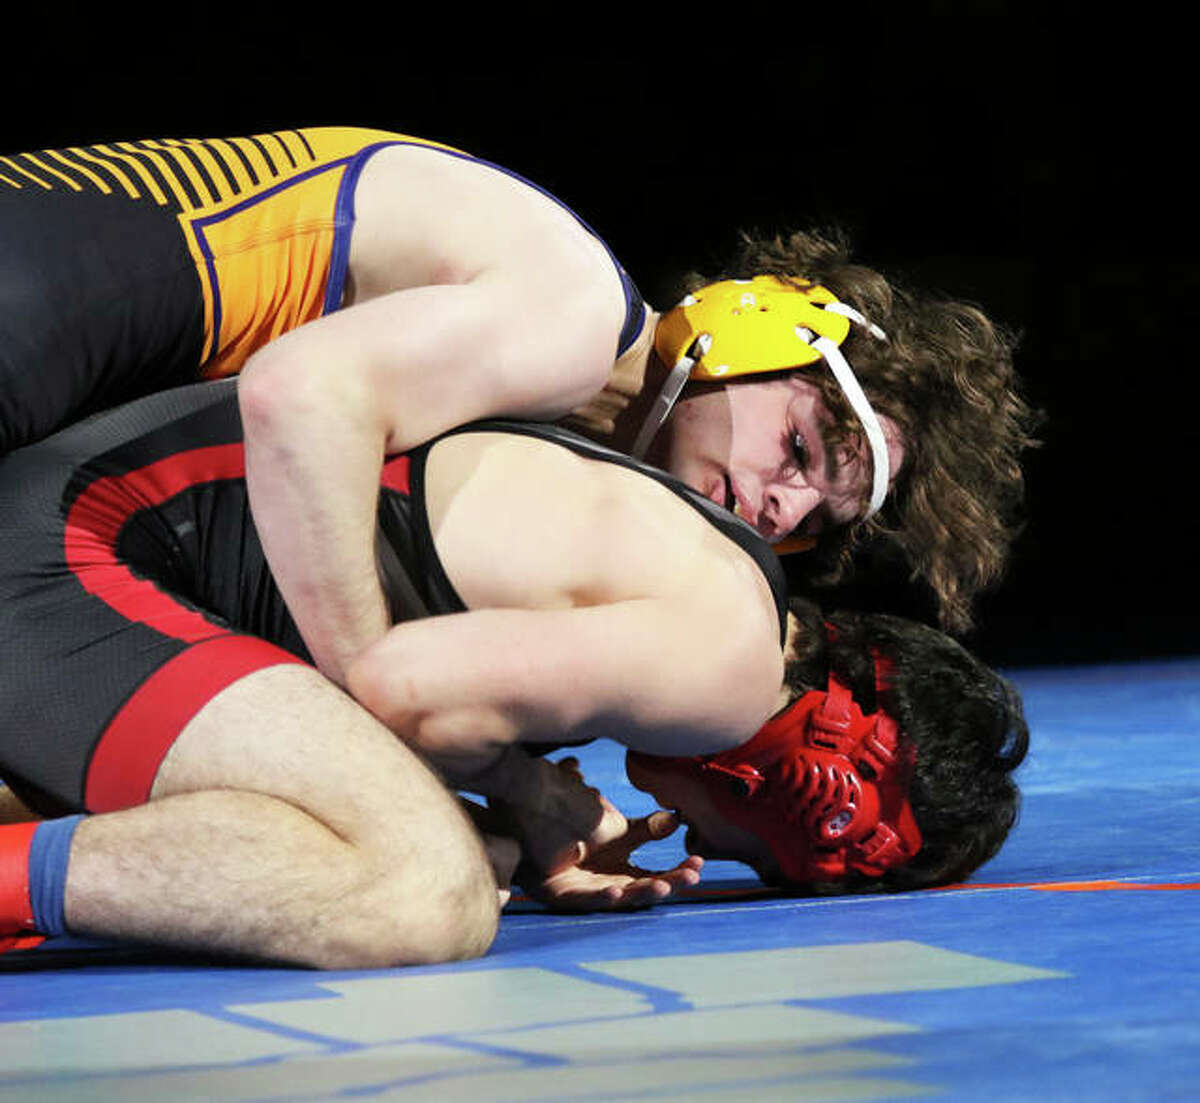 CM senior Vinny Zerban (top) works over Deerfield’s Ben Shvartsman in the 152-pound title match at the IWCOA Class 2A state meet on June 25 in Springfield. Zerban won by fall in 48 seconds to finish the season 28-0.